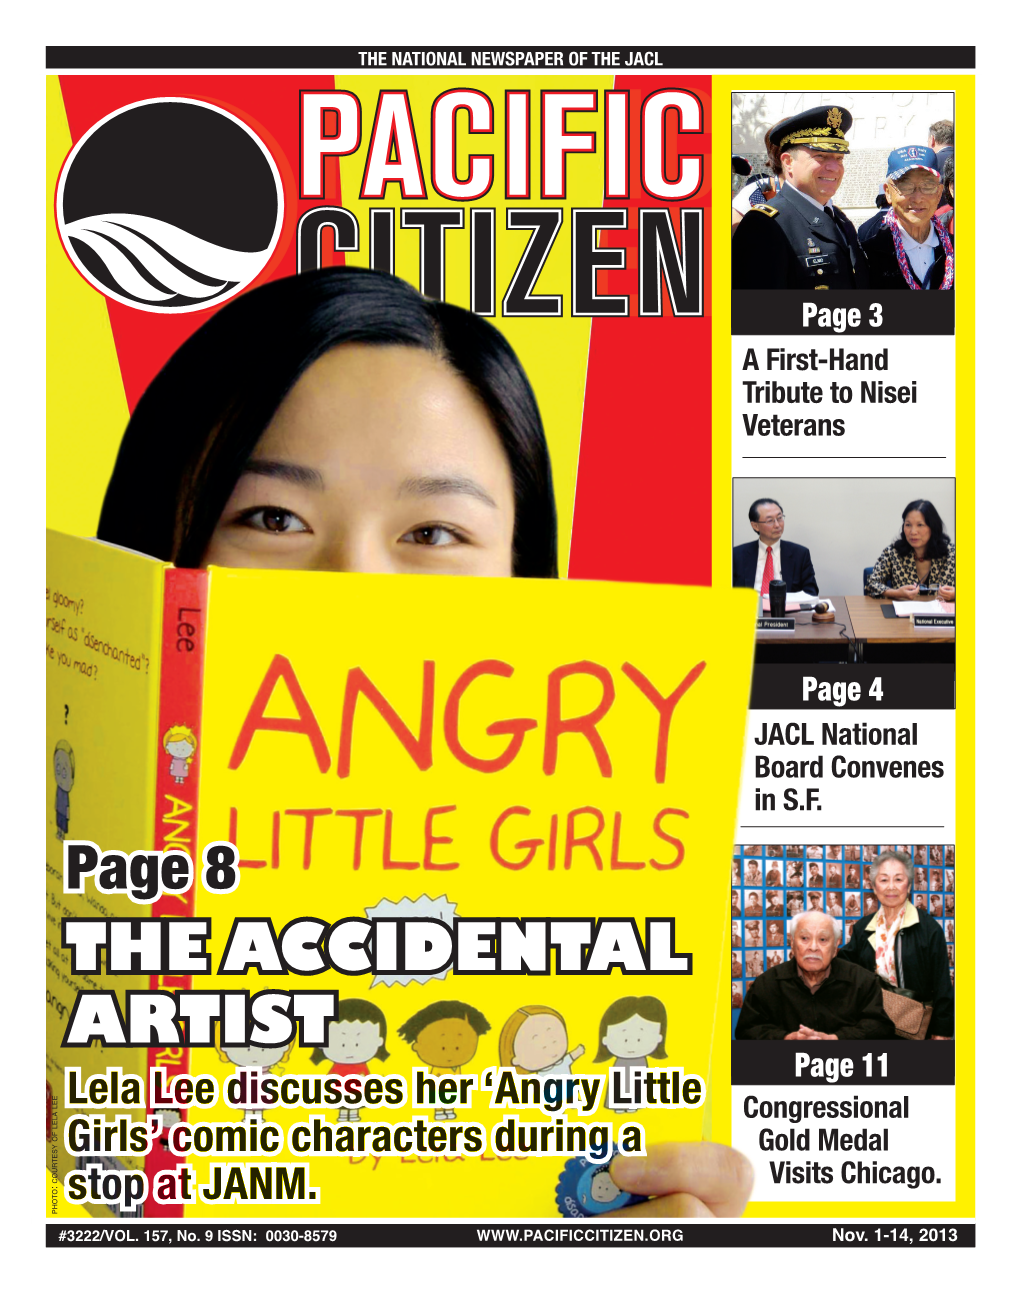 THE ACCIDENTAL ARTIST Page 11 LEE Lela Lee Discusses Her ‘Angry Little Congressional LELA